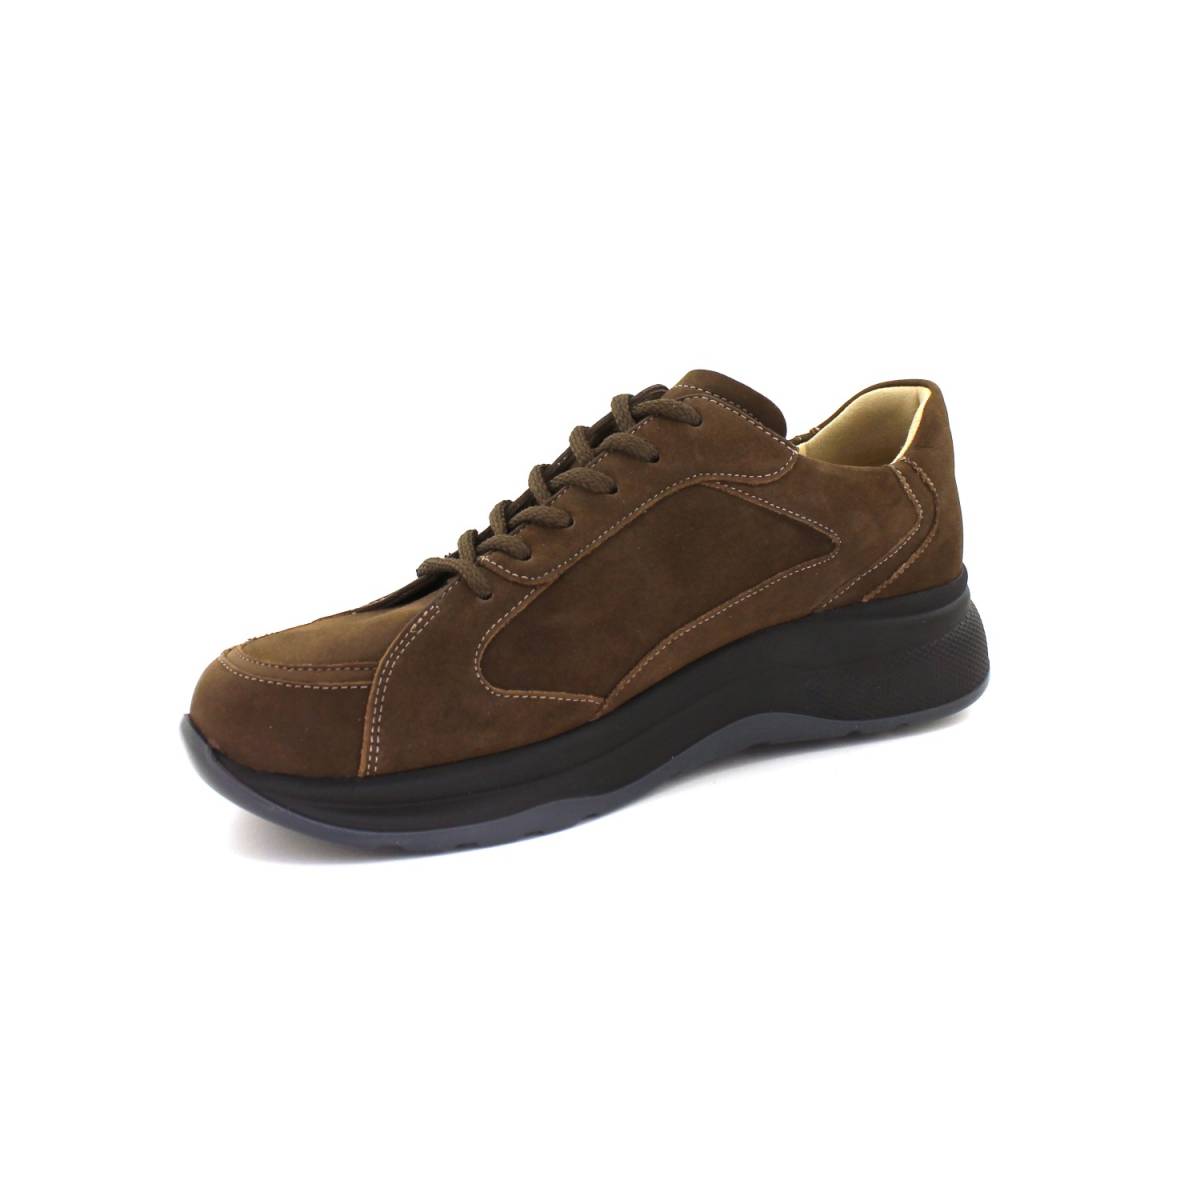 Finn Comfort Piccadilly - Oilbuk/Nut Piccadilly - Oilbuk/Nut - www.holwegschoenen.nl - Holweg Schoenen